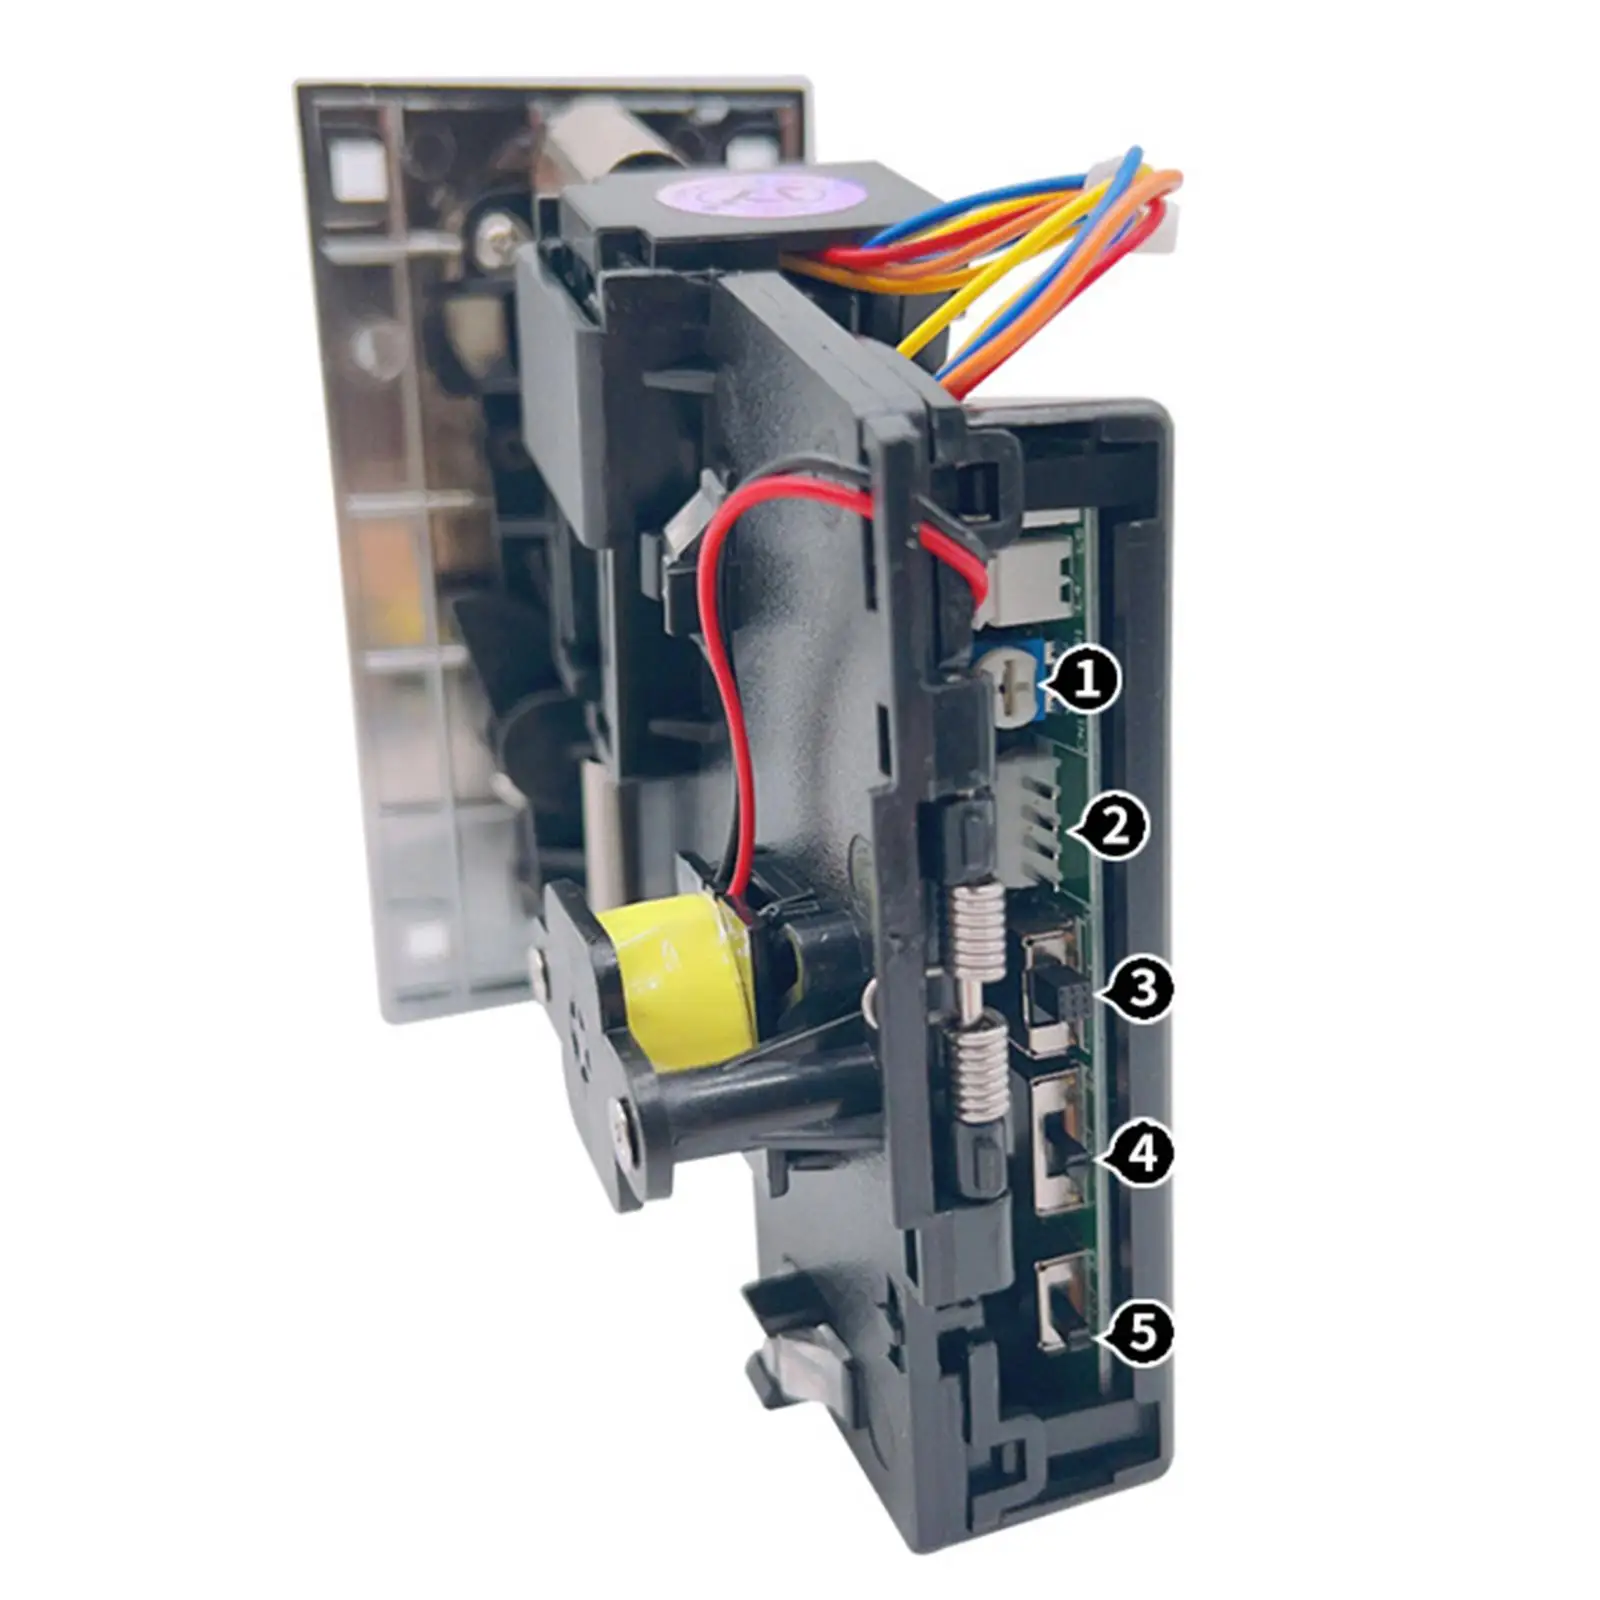 Coin Acceptor Selector Indoor Toy Jy-100F Comparative Arcade Game for Game Machine Street Basketball Doll Machine Replacements